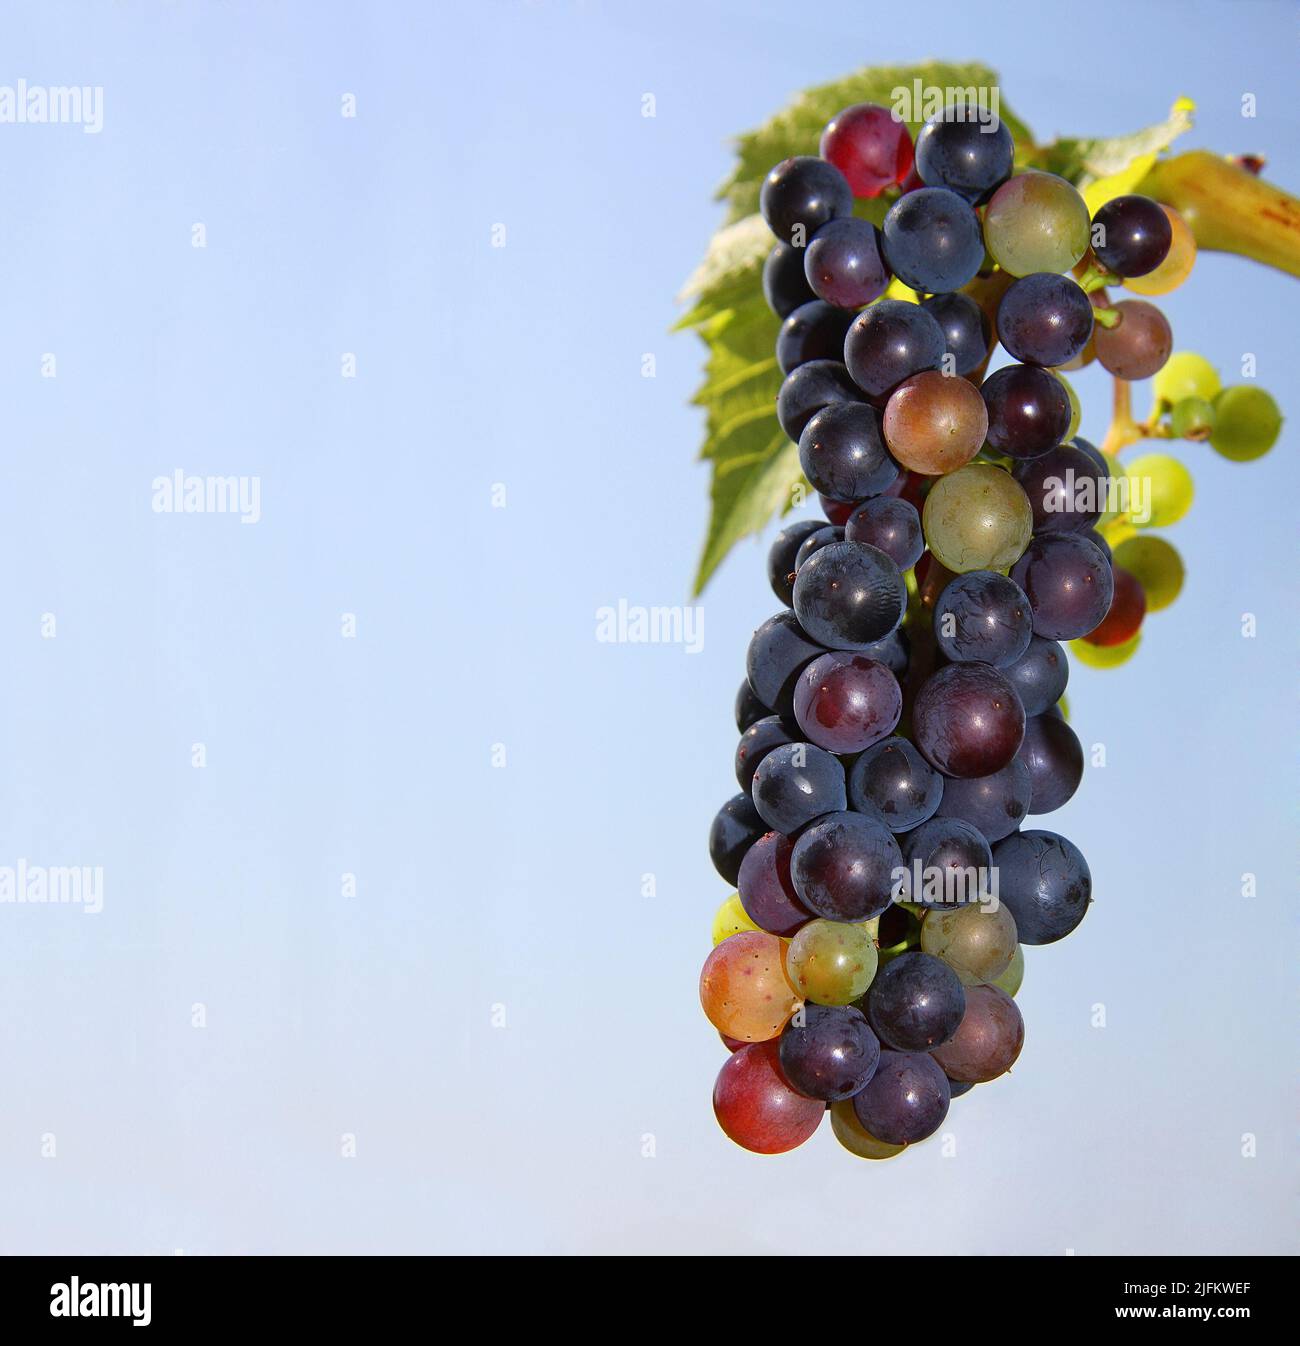 Grapes on a vine against clear blue sky with copy space Stock Photo